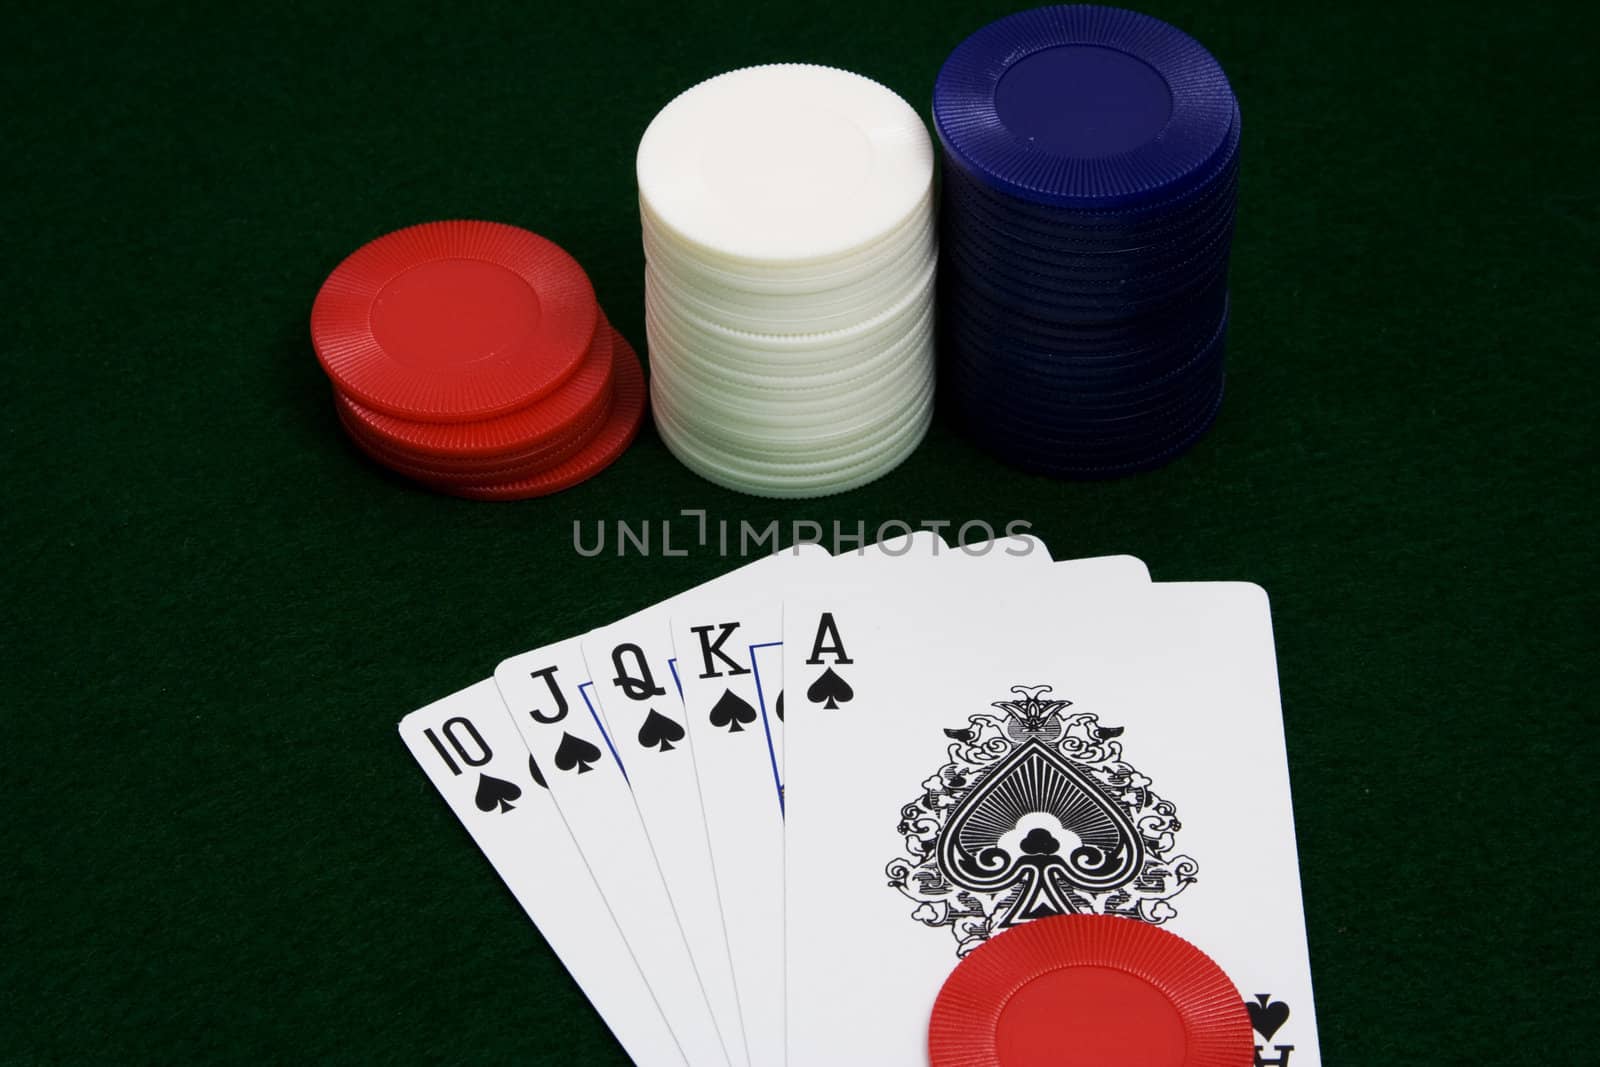 straight flush ace high over green felt with three stacks of chips shot close up